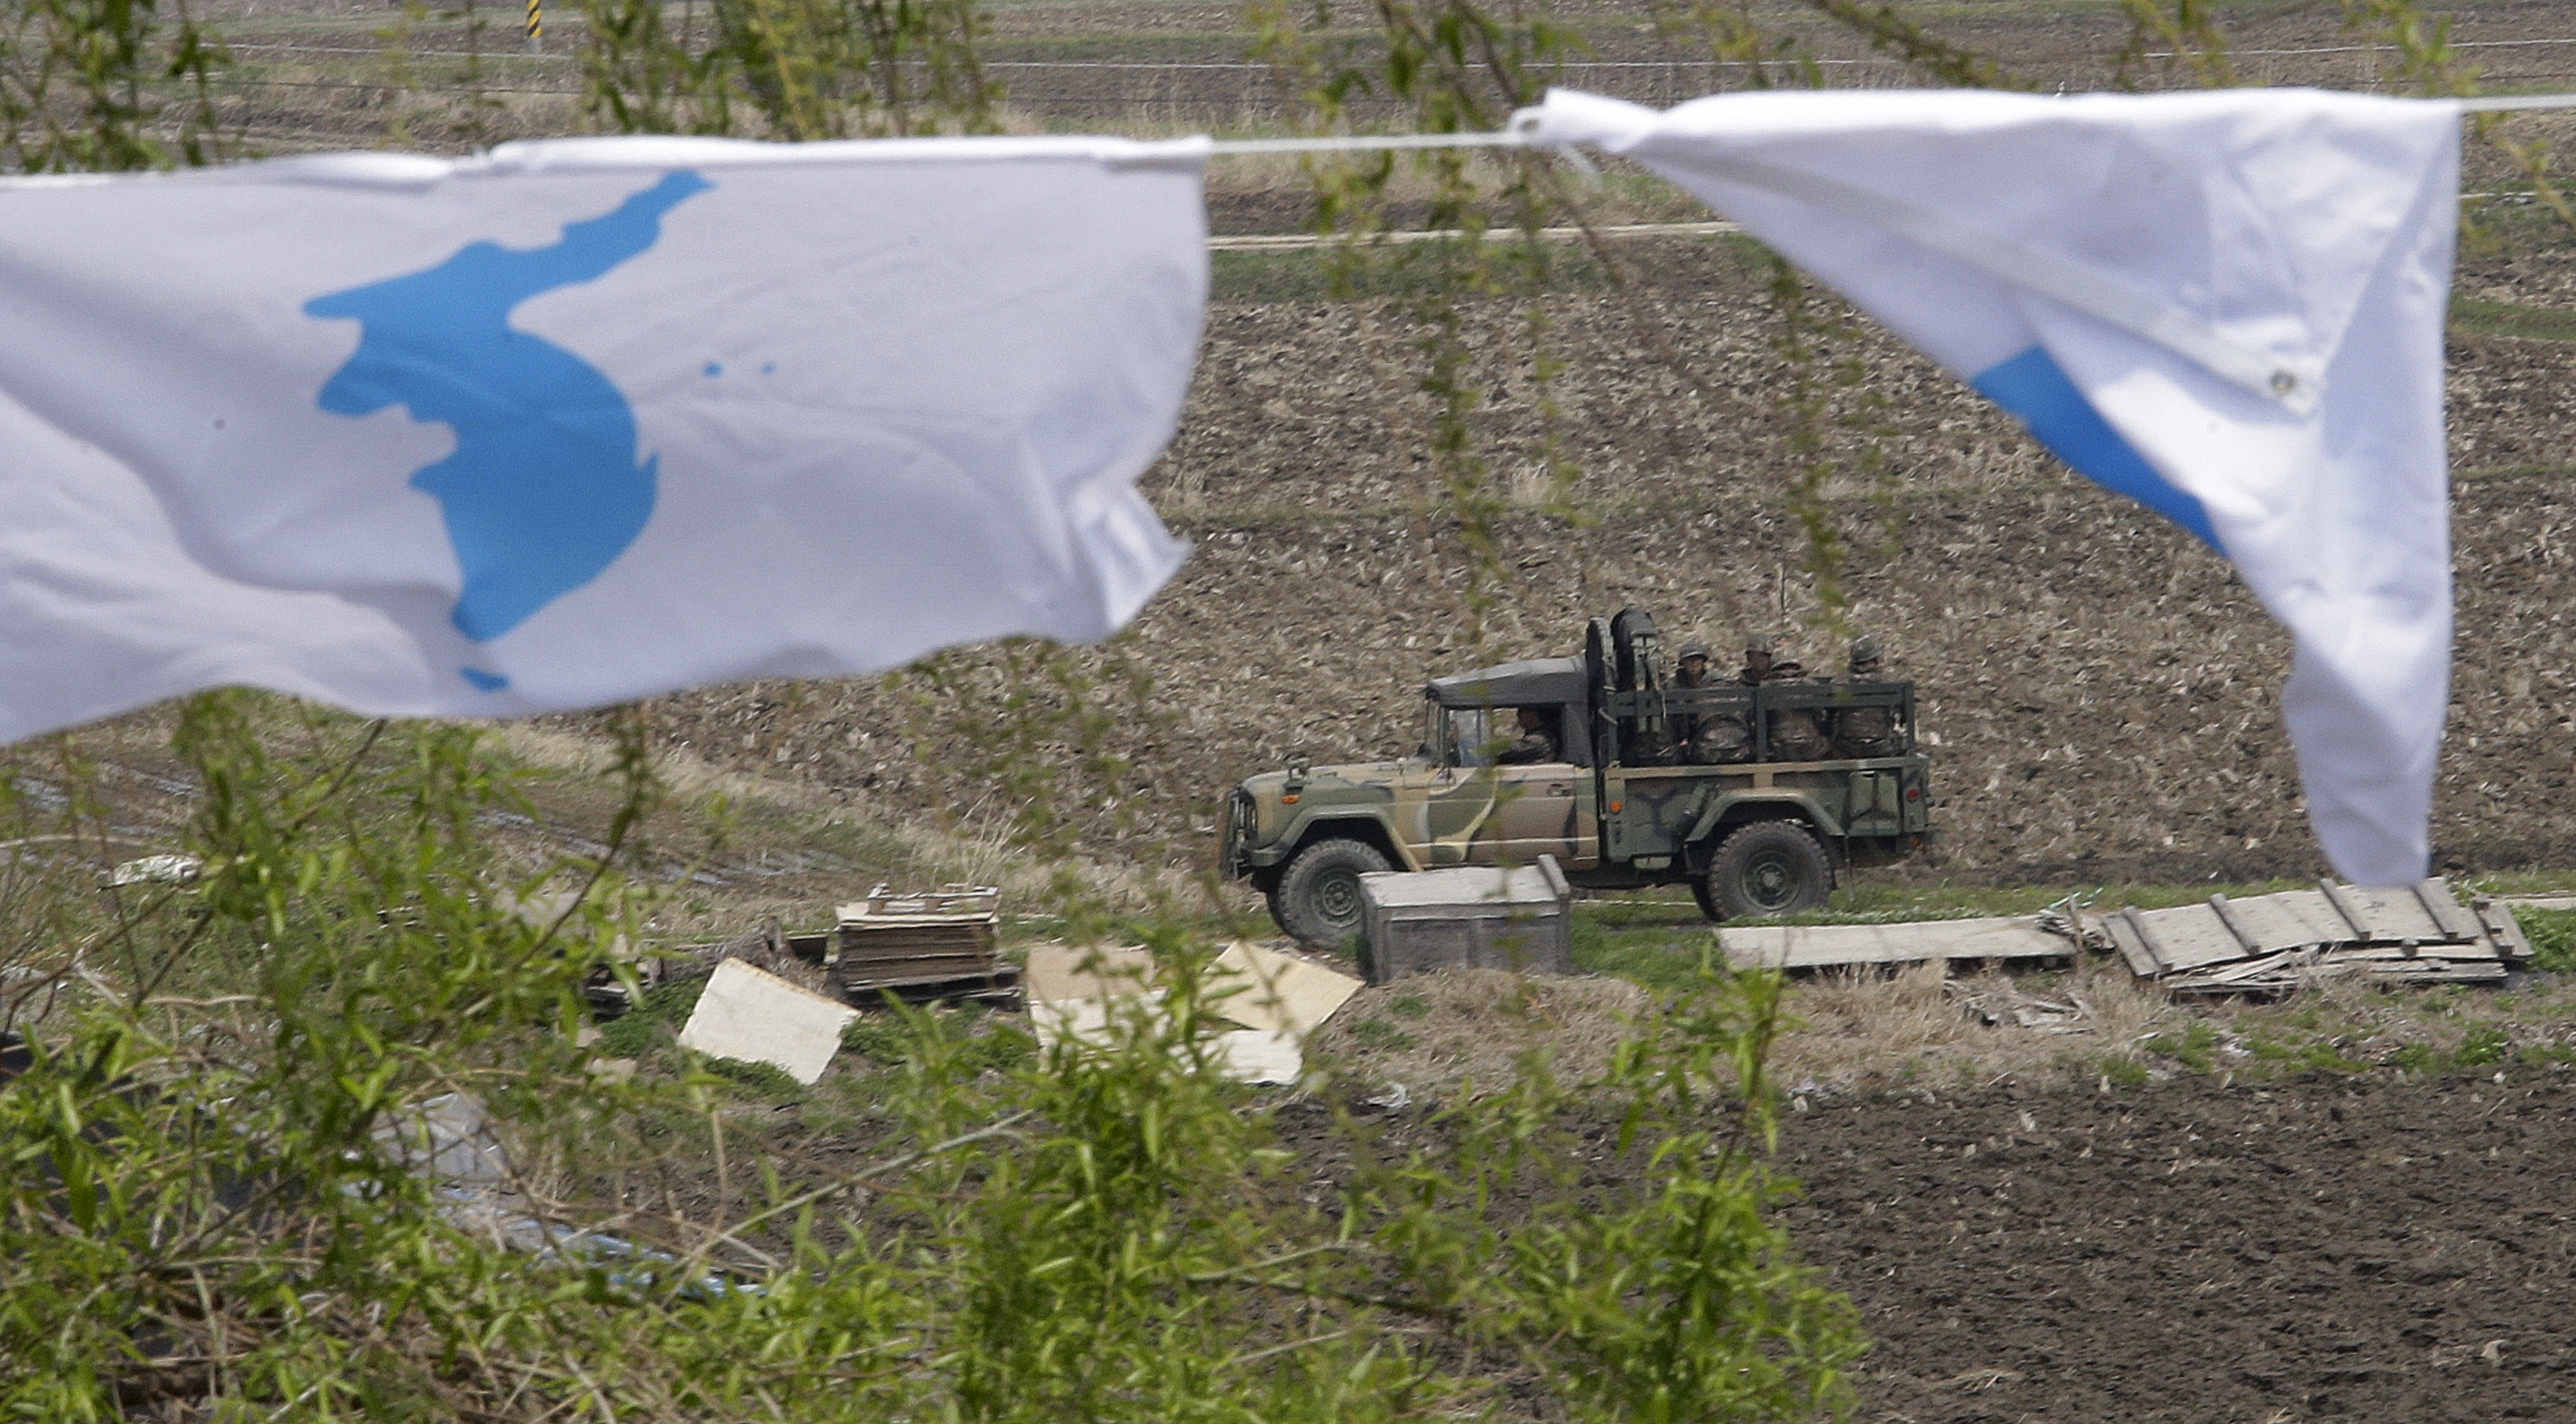 A South Korean military vehicle passes by unification flags near Unification Bridge, which leads to the Panmunjom in Paju, South Korea, Thursday, April 26, 2018. North Korean leader Kim Jong Un and South Korean President Moon-Jae-in will plant a commemorative tree and inspect an honor guard together after Kim walks across the border Friday for their historic summit, Seoul officials said Thursday. (AP Photo/Ahn Young-joon)